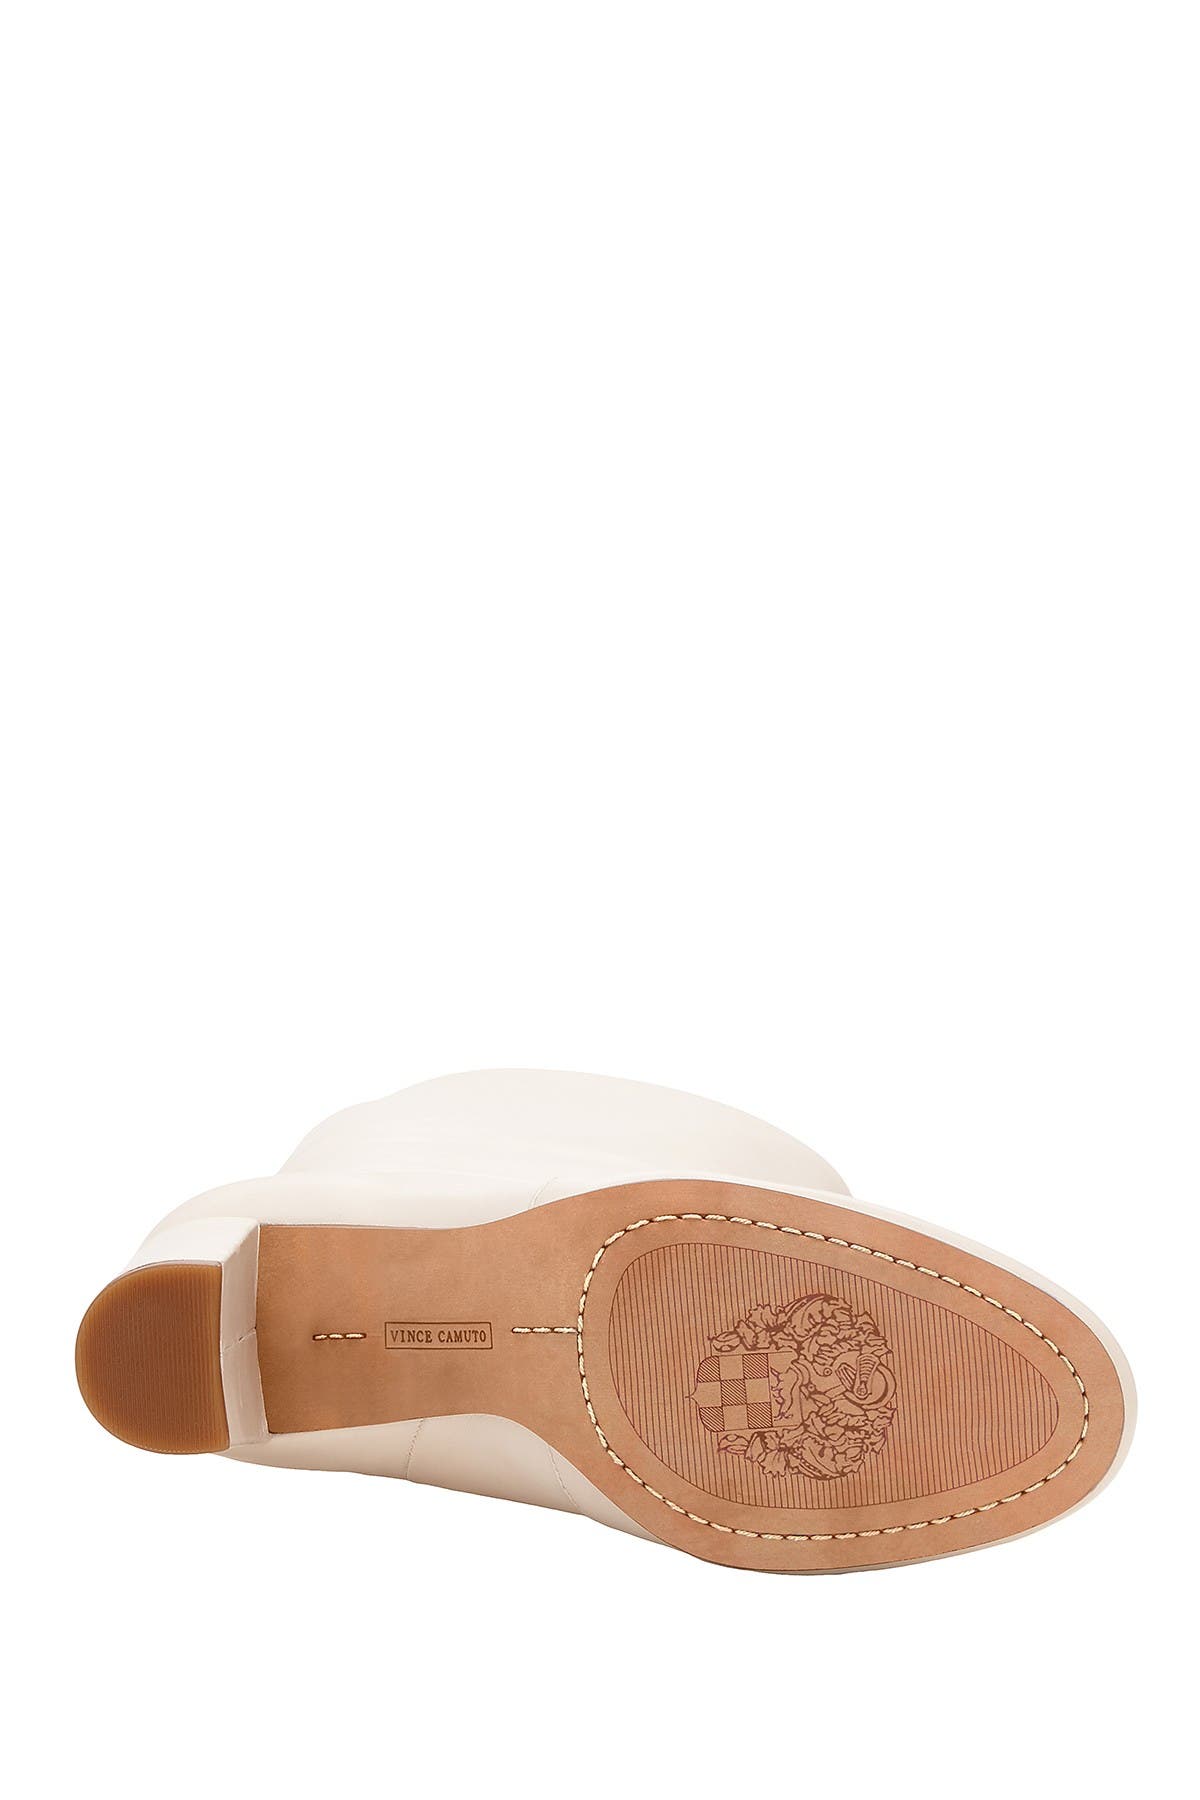 vince camuto sessily